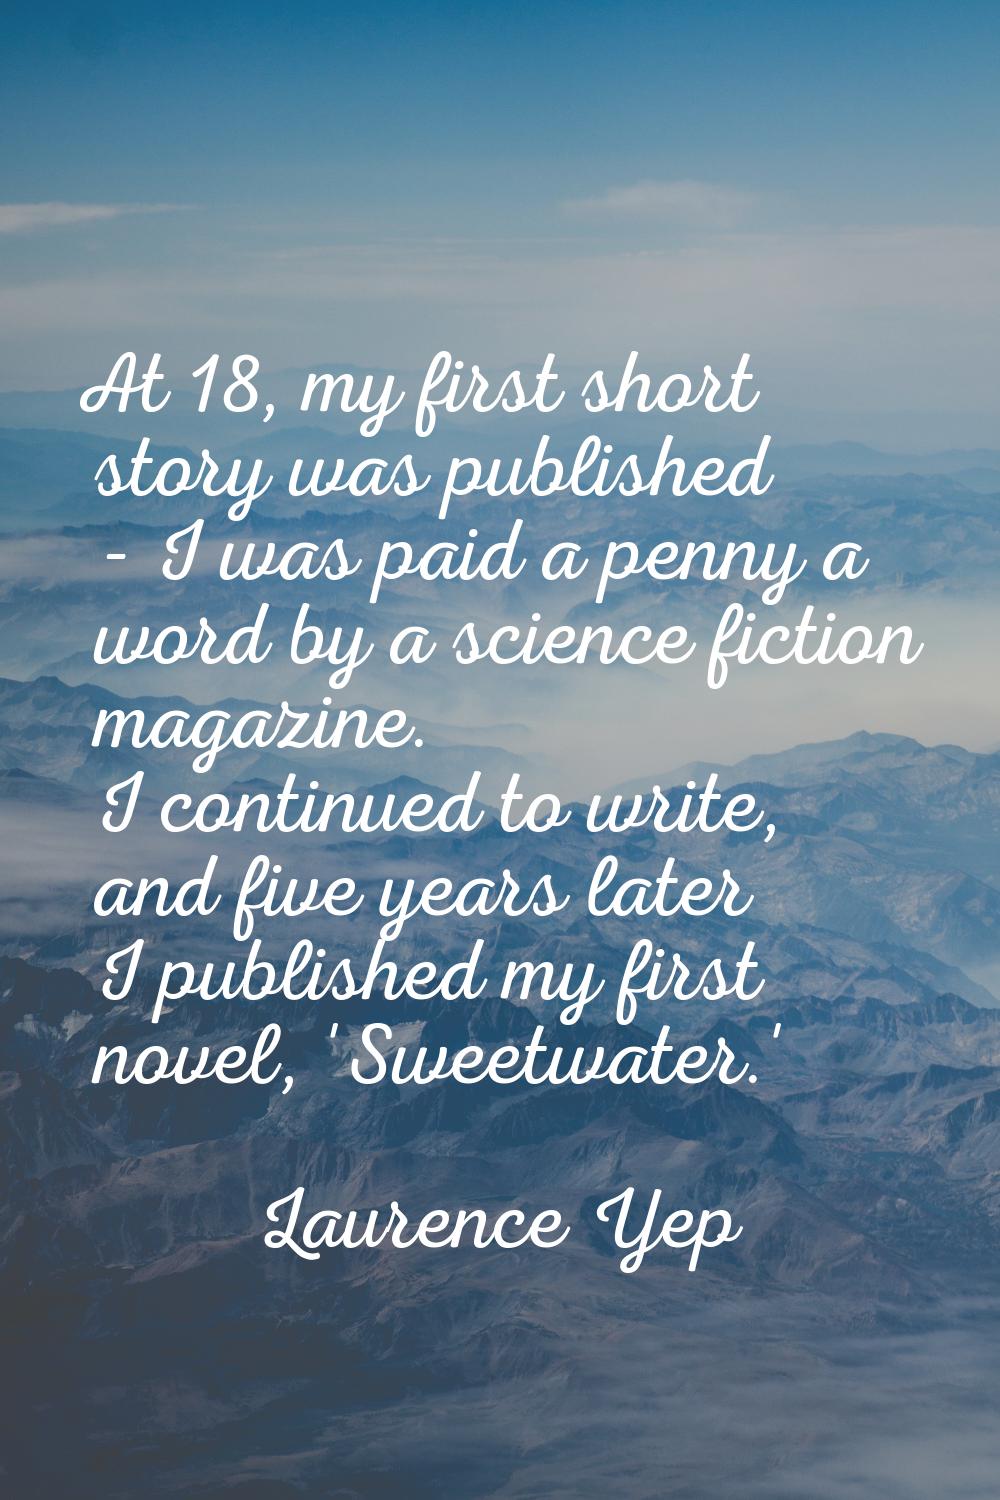 At 18, my first short story was published - I was paid a penny a word by a science fiction magazine